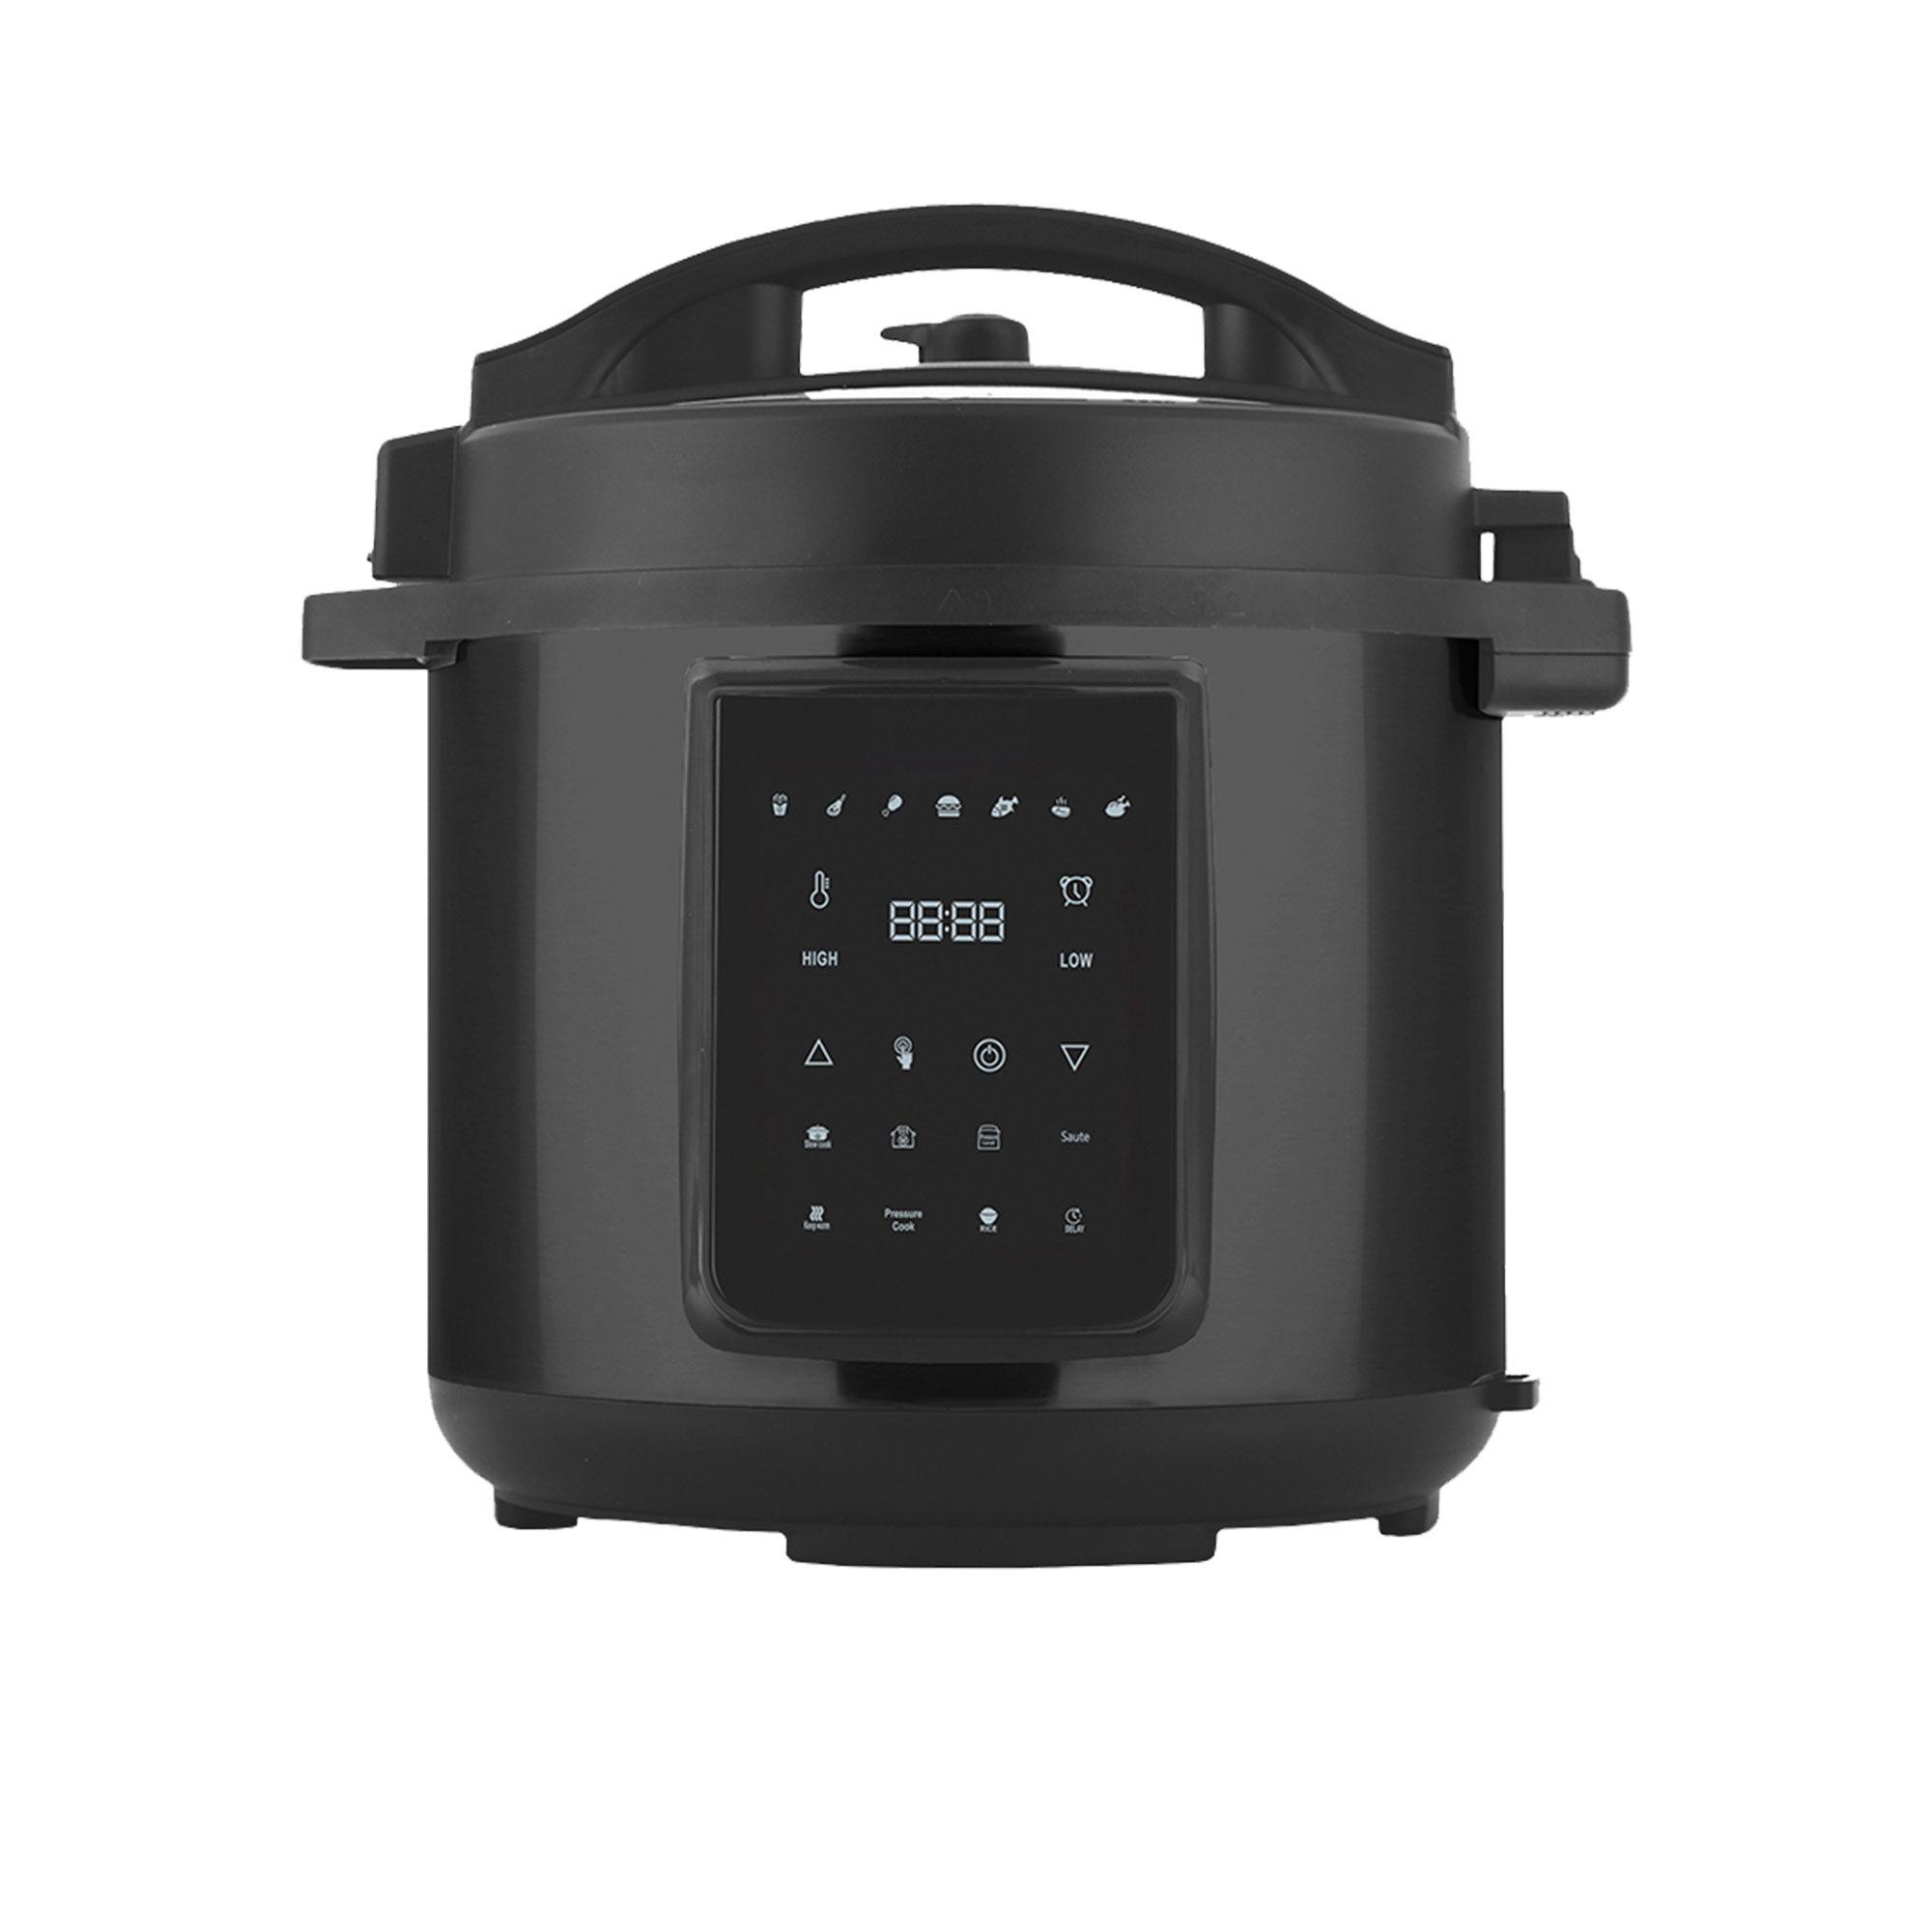 Healthy Choice 2 in 1 Air Fryer and Pressure Cooker 6L Black Image 2